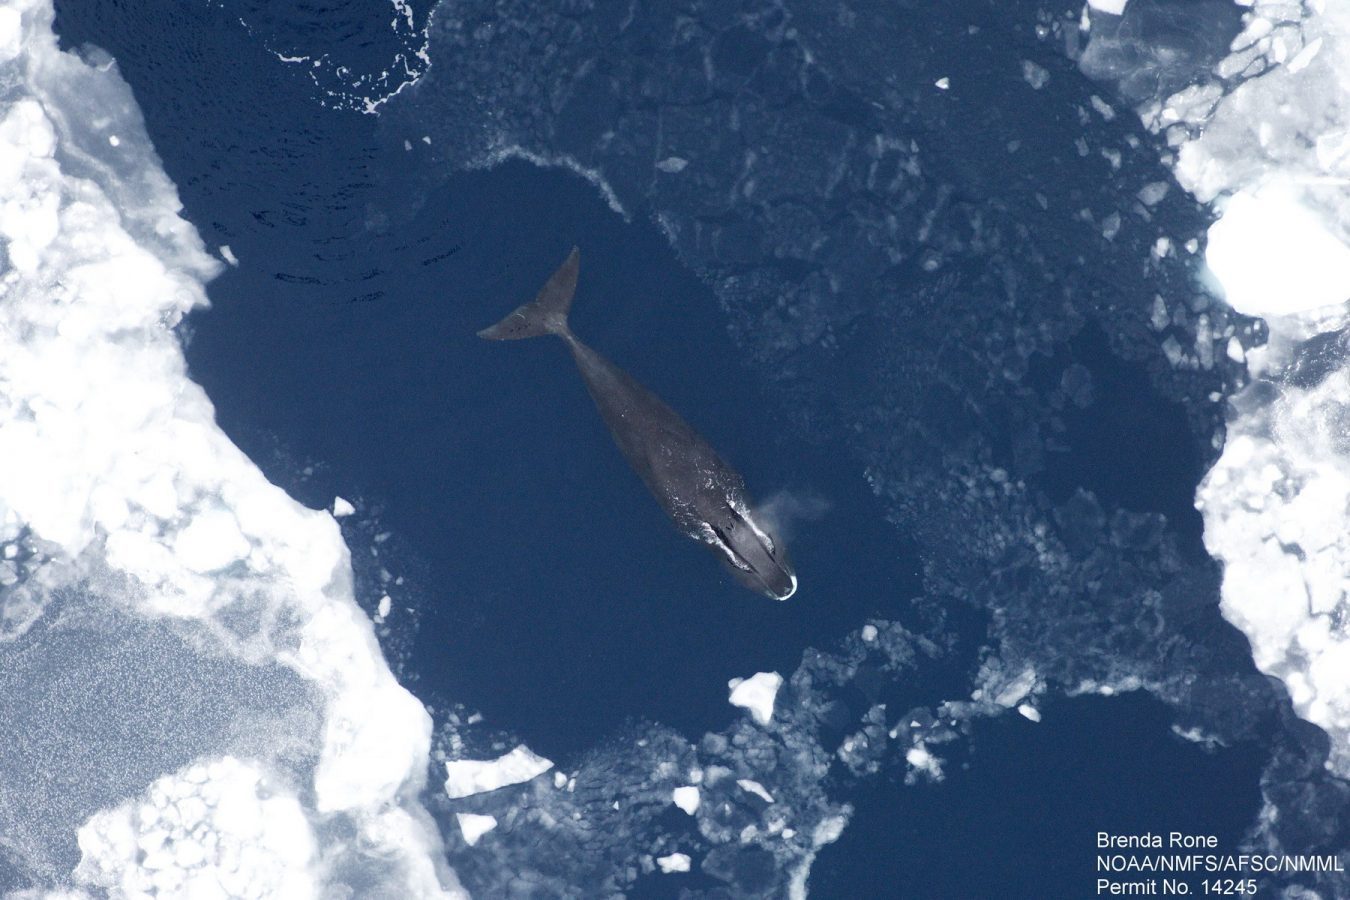 Bowhead whale (Balaena mysticetus) in the western Beaufort Sea during an aerial survey in 2011.